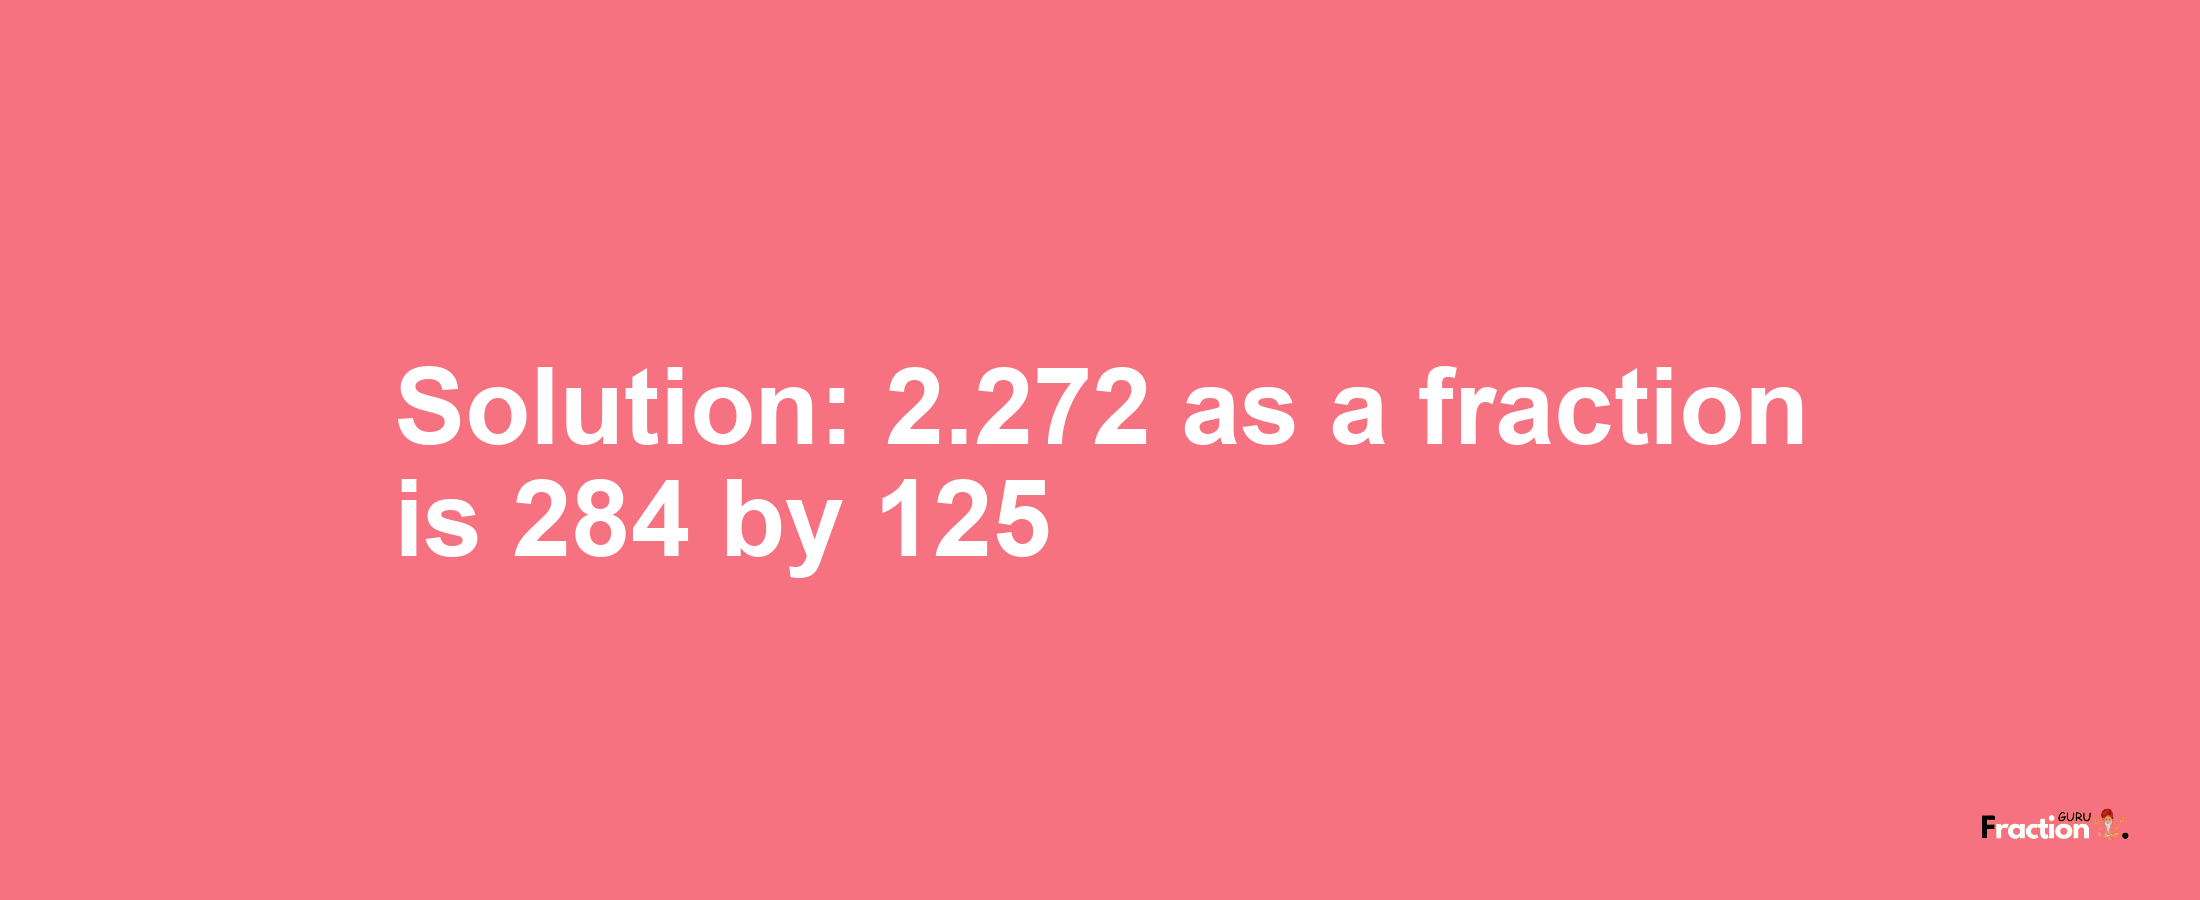 Solution:2.272 as a fraction is 284/125